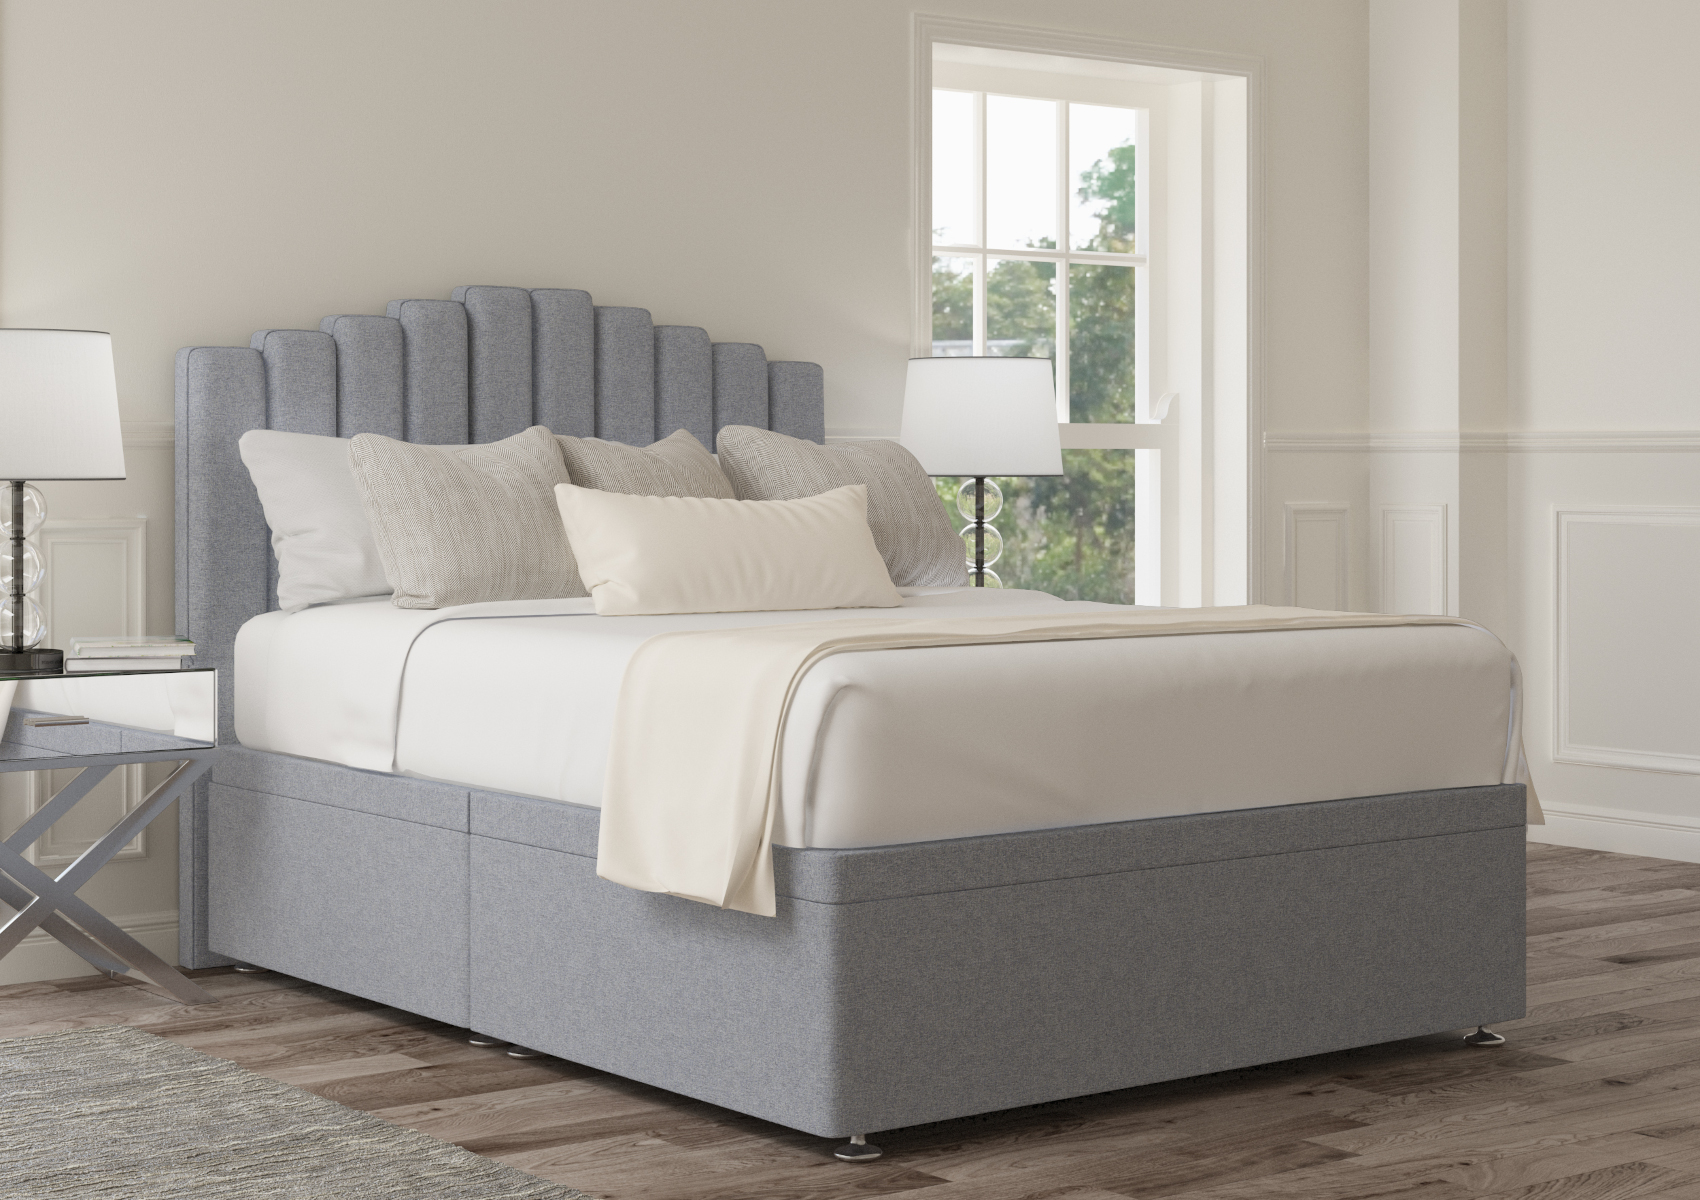 View Quinn Arran Natural Upholstered Super King Ottoman Bed Time4Sleep information